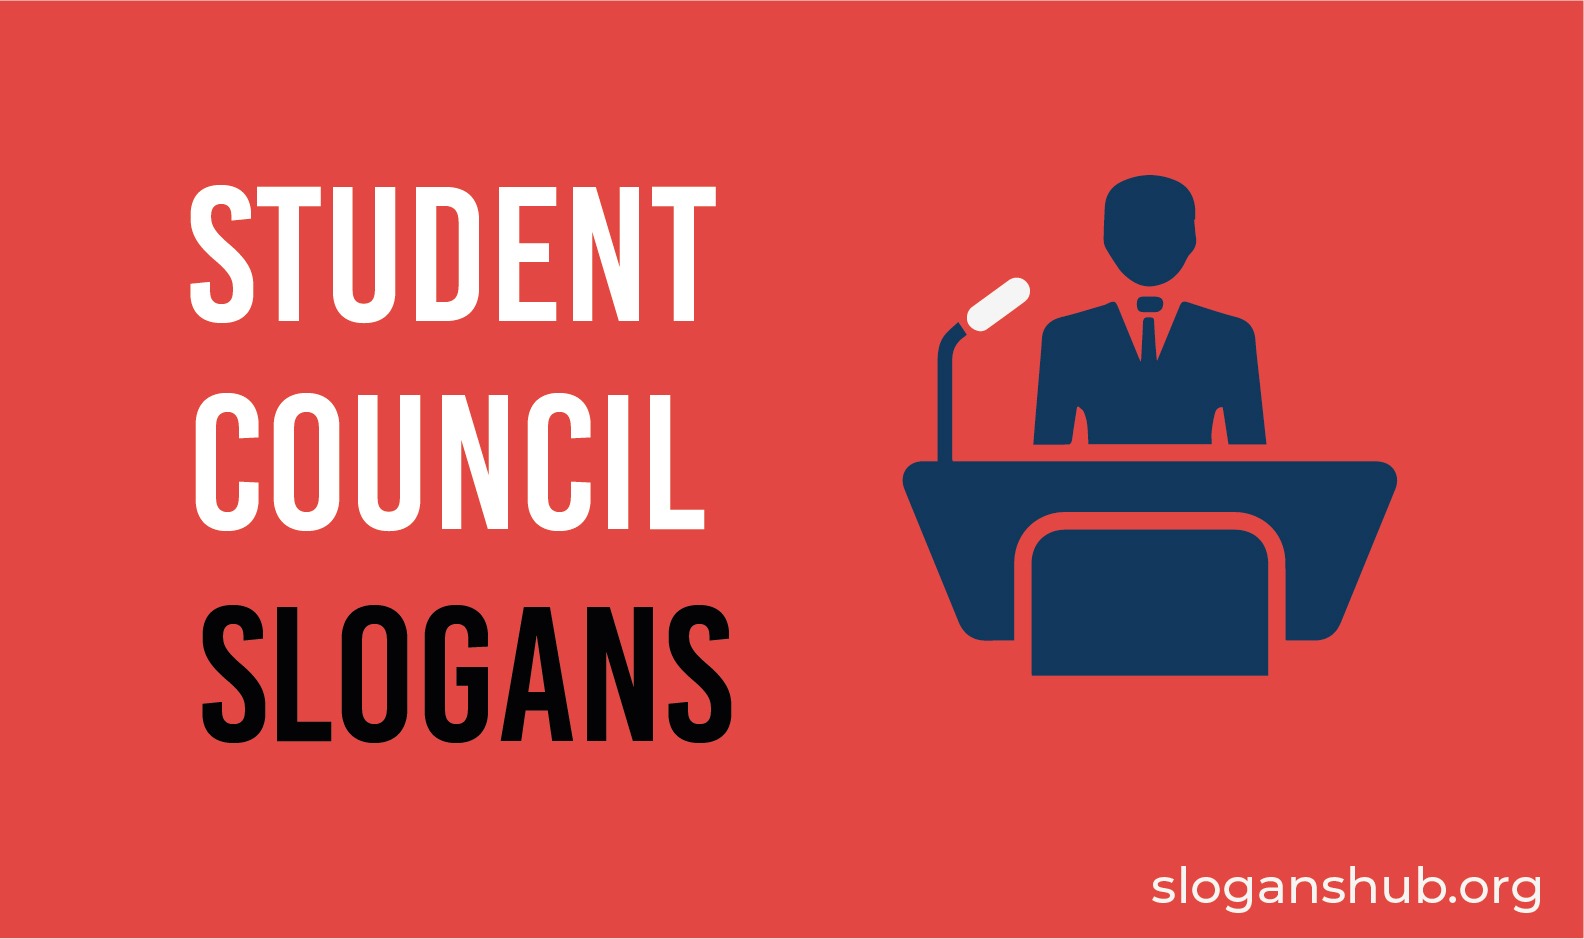 40 Funny Student Council Campaign Slogans